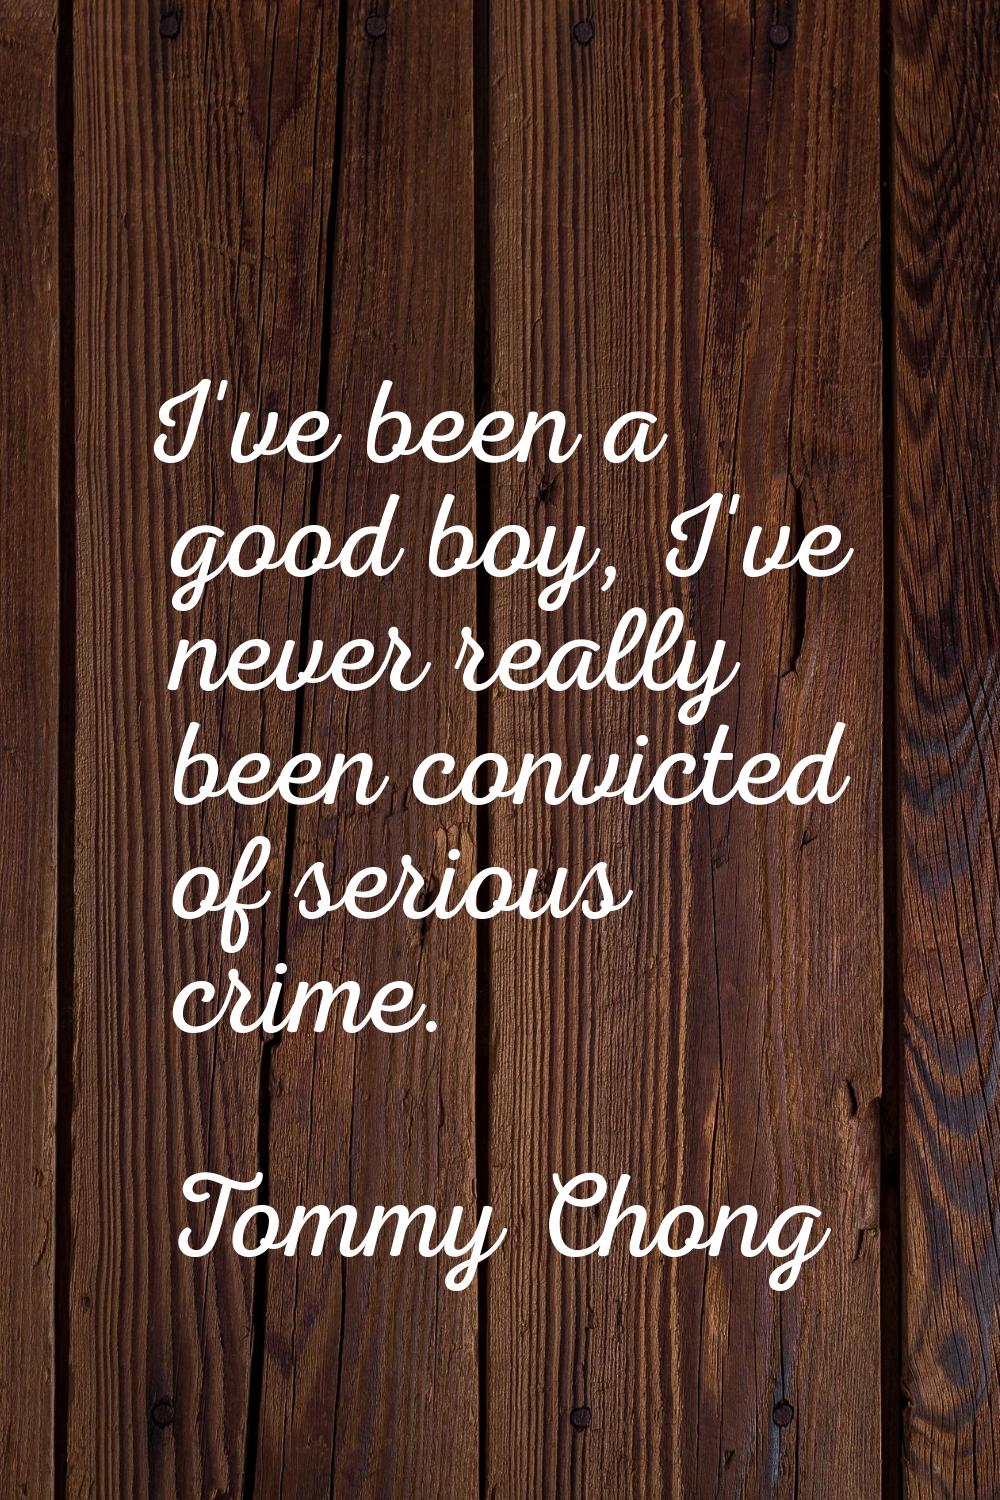 I've been a good boy, I've never really been convicted of serious crime.